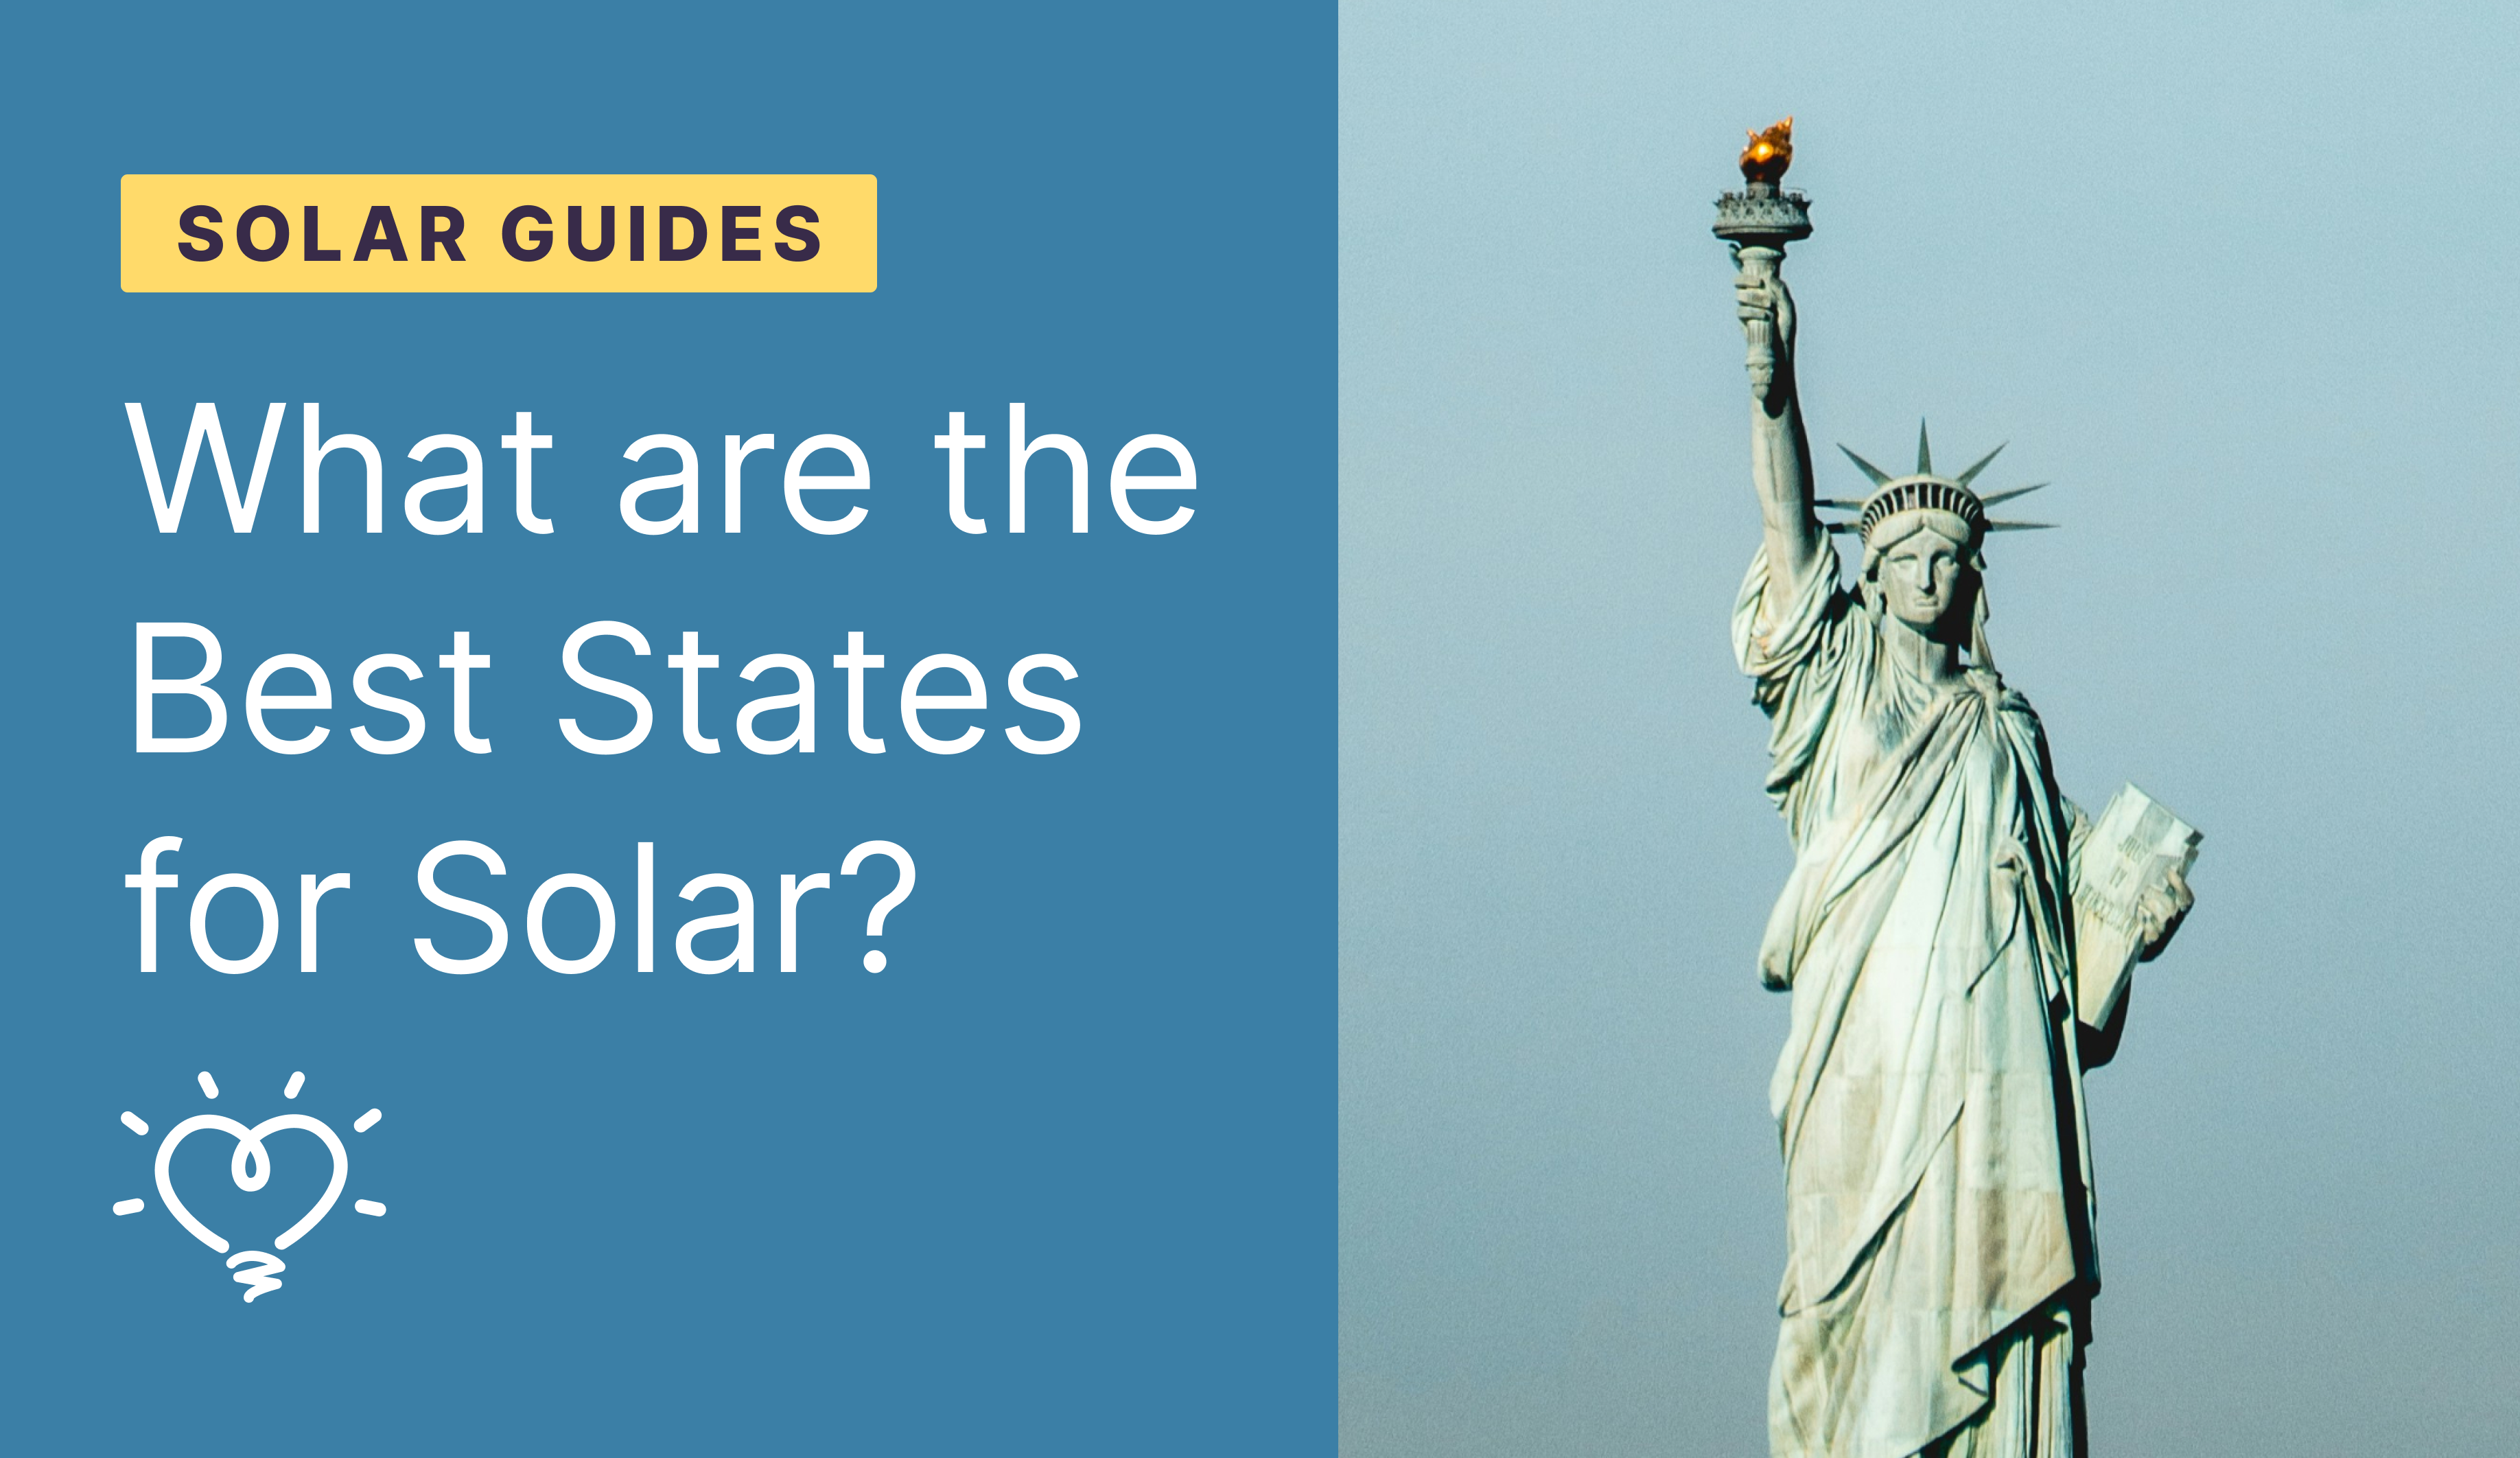 What are the Best States for Solar?